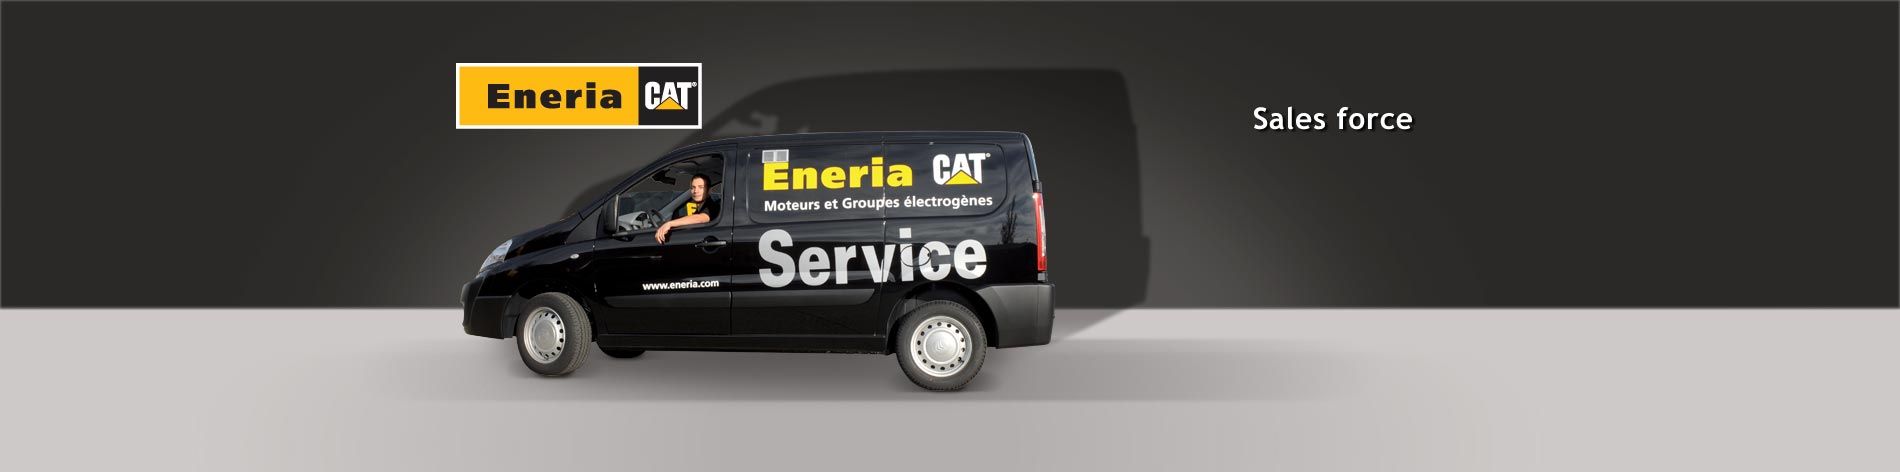 Service & Maintenance positions guarantee a high level of services to our customers.